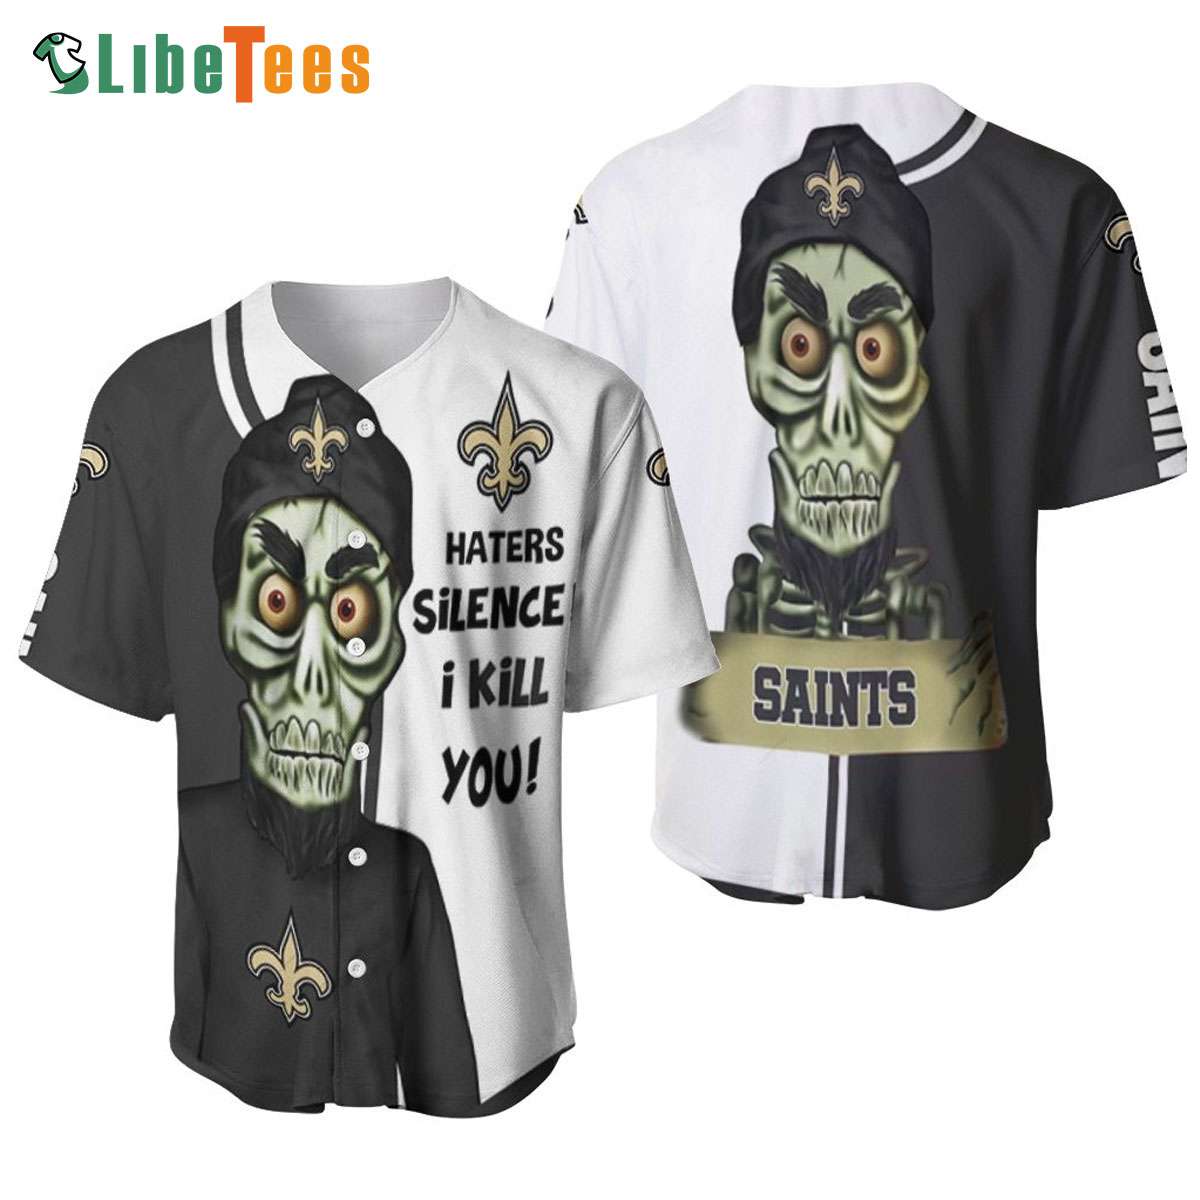 New Orleans Saints Baseball Jersey Haters I Kill You